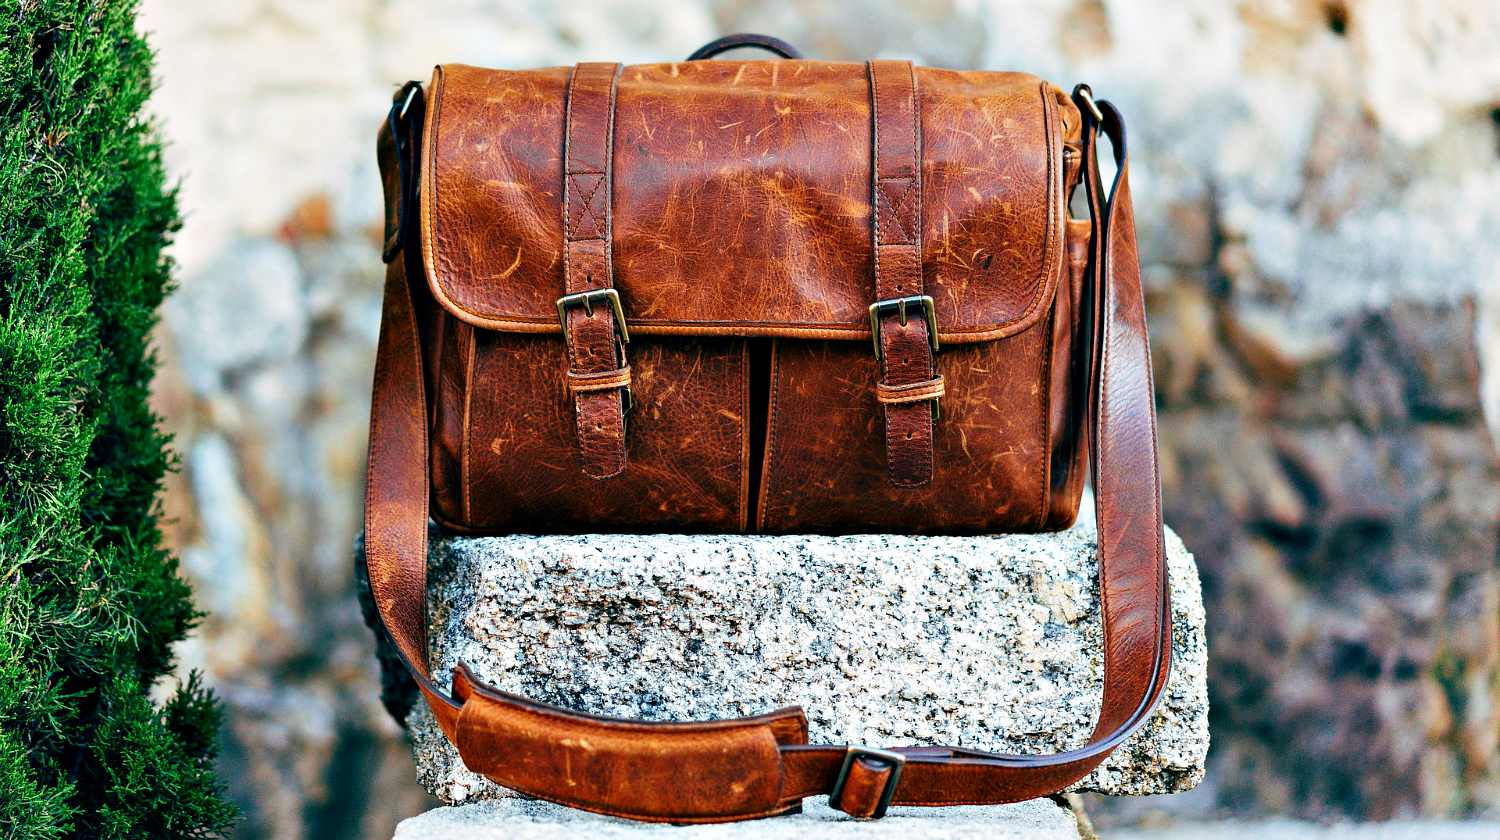 Classic brown leather bag | Urban EDC: Tools For The Best Urban Every Day Carry Kit | Featured